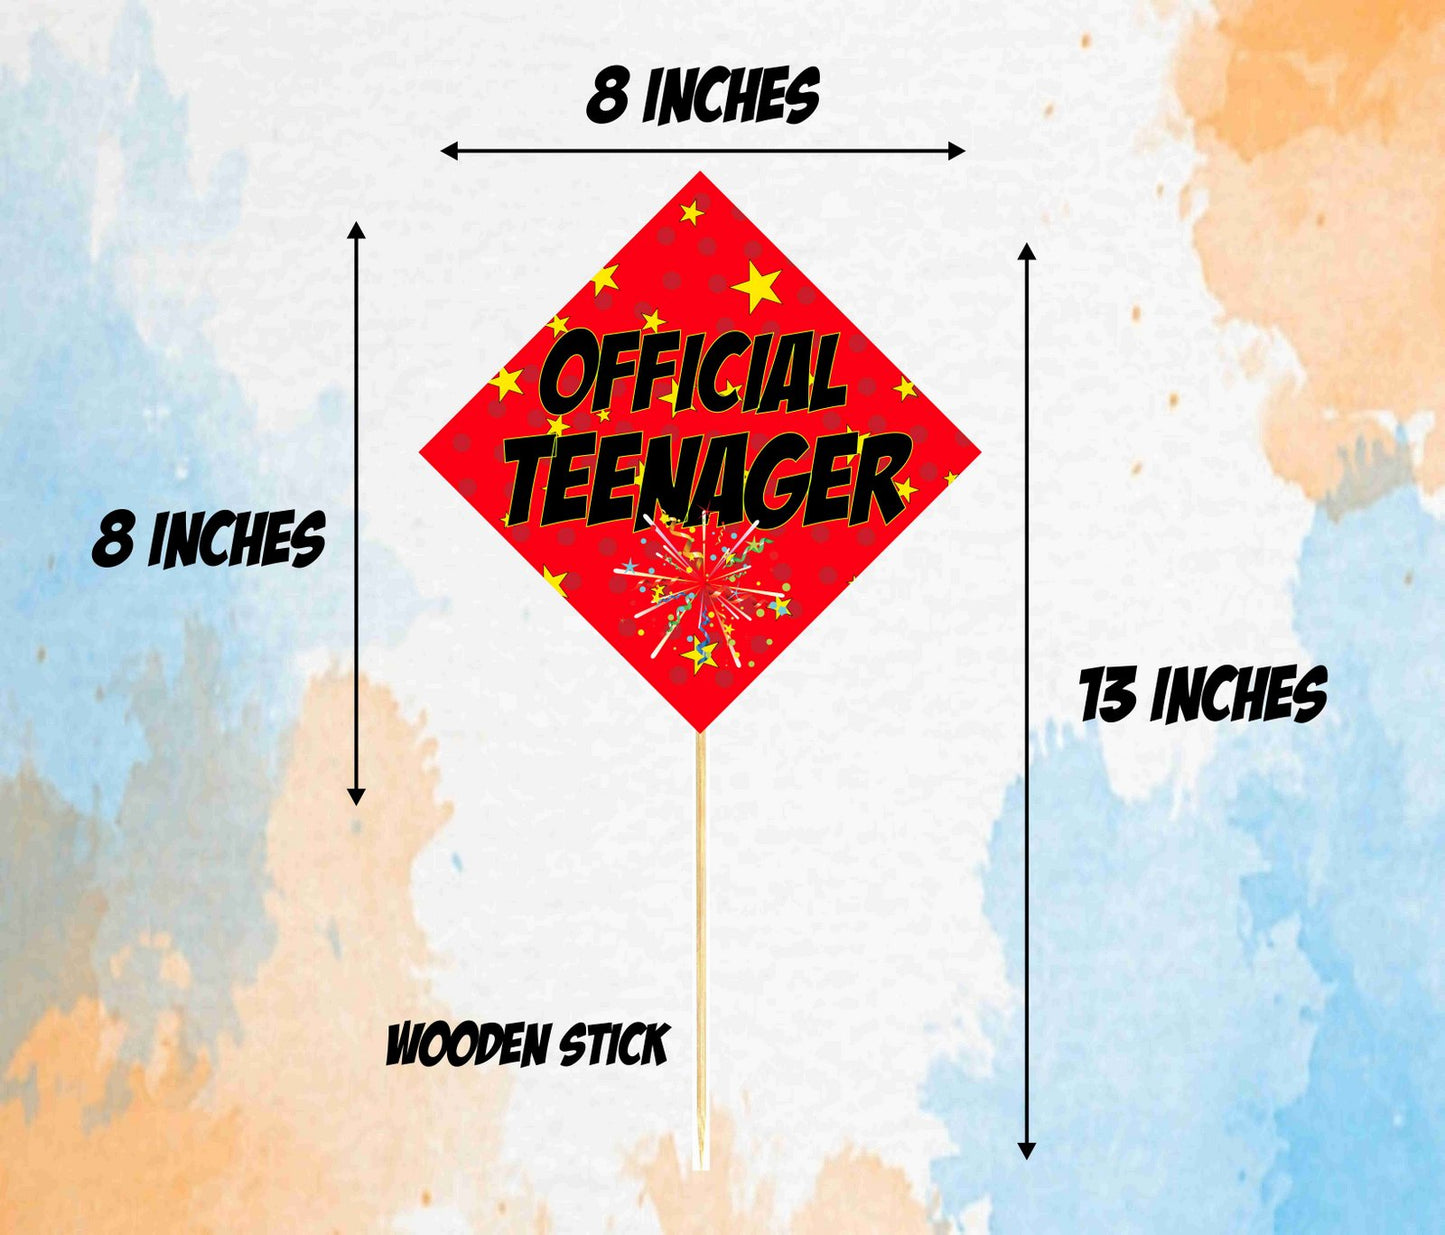 Official Teenagers Birthday Photo Booth Party Props Teen Birthday Party Decoration Photo Booth Party Item for Adults and Kids (Pack of 10)